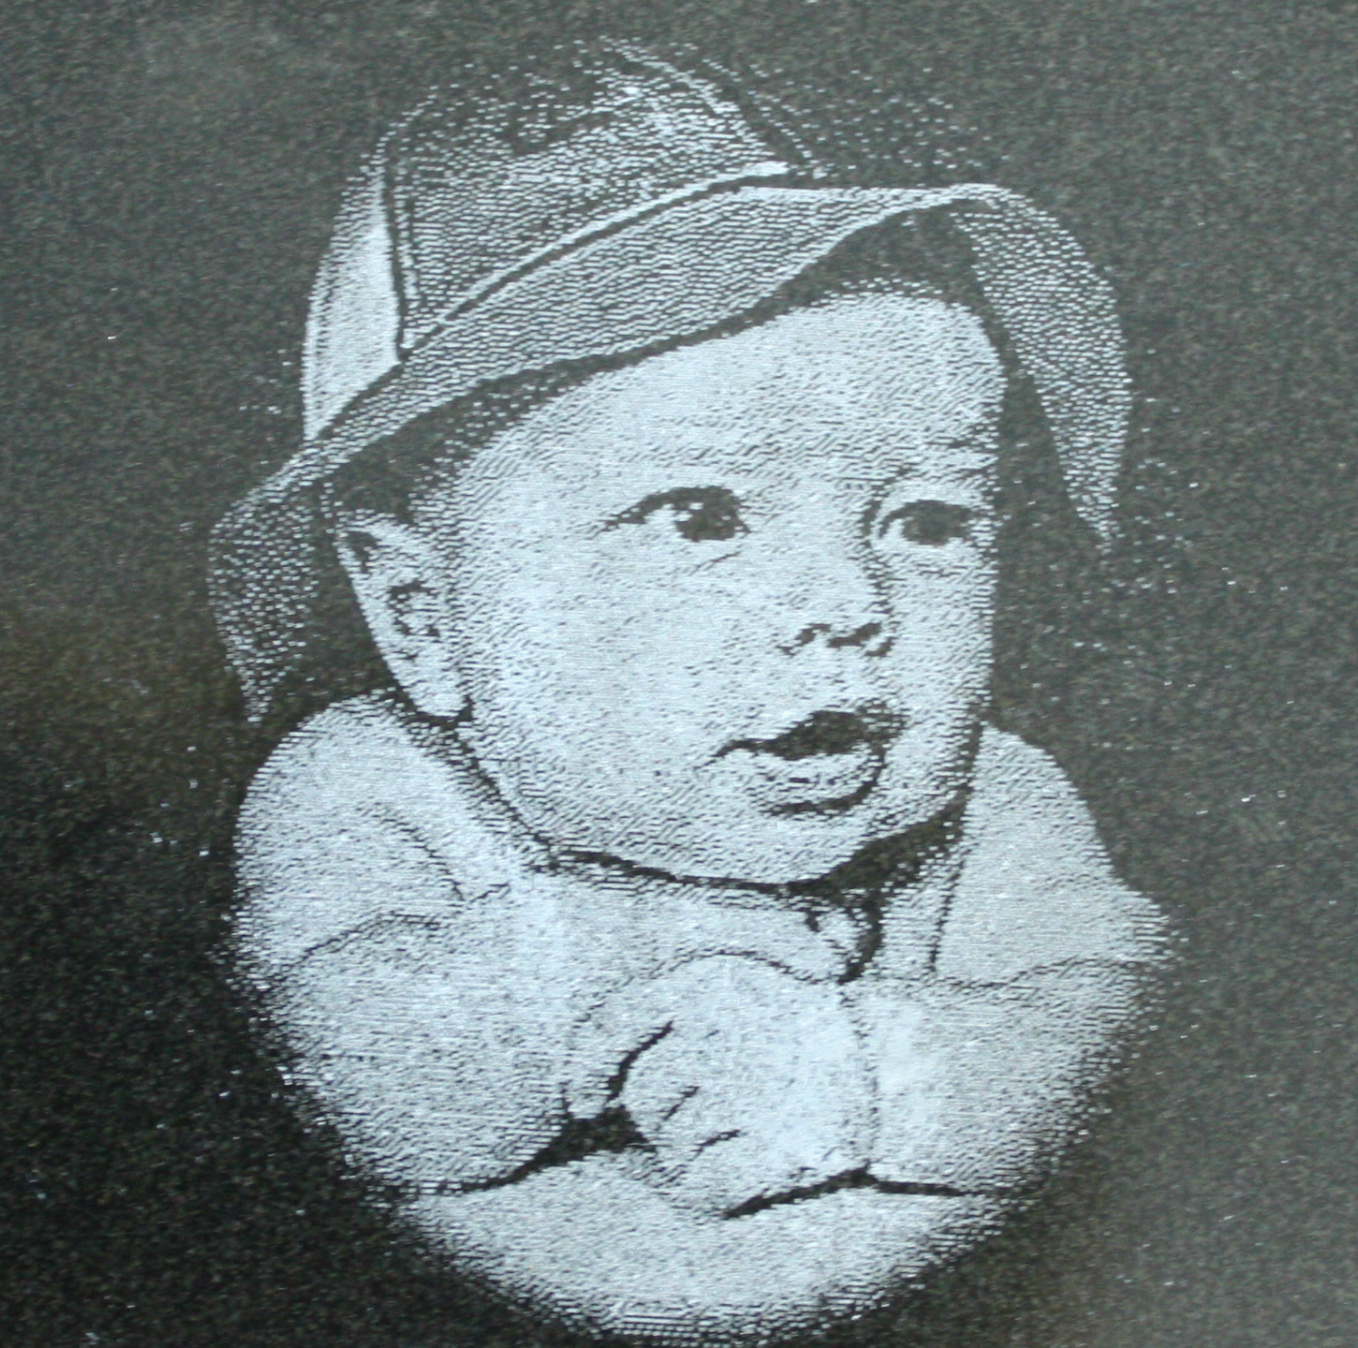 A darling picture of a baby lazer etched into a granite heart.